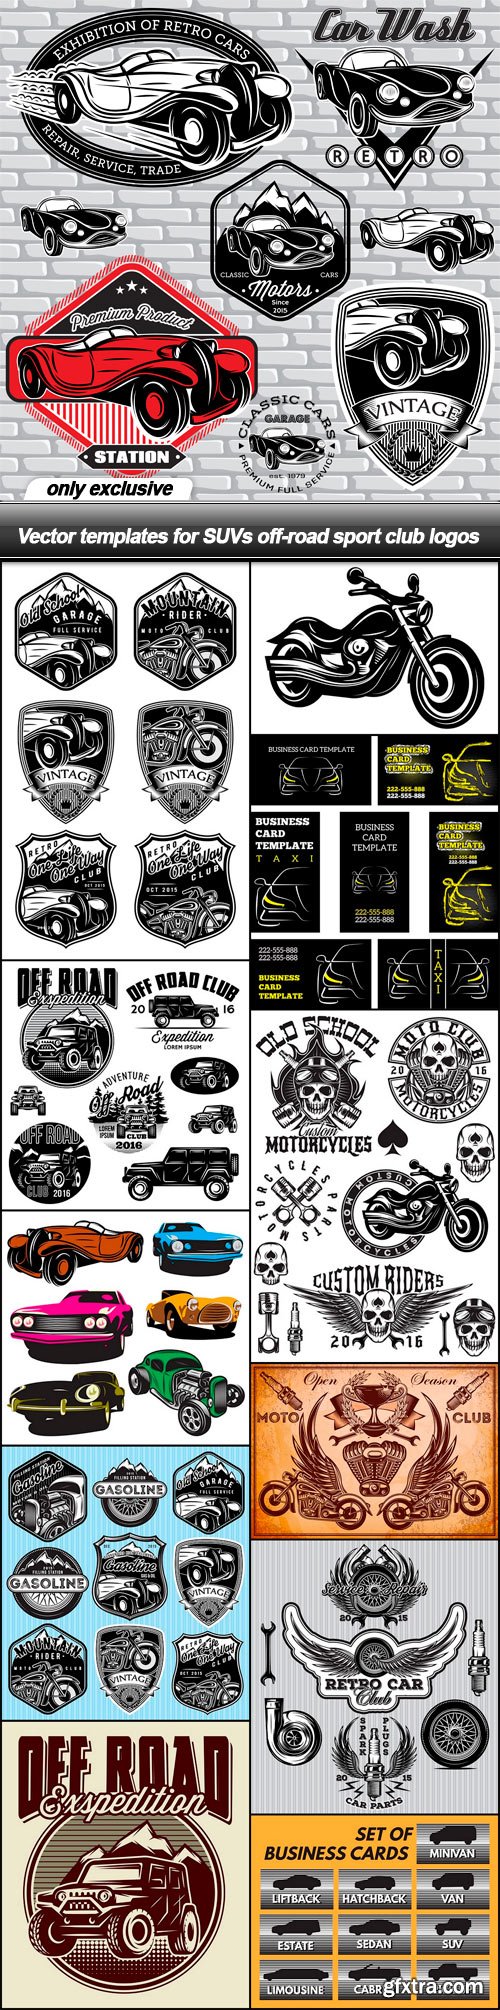 Vector templates for SUVs off-road sport club logos - 12 EPS